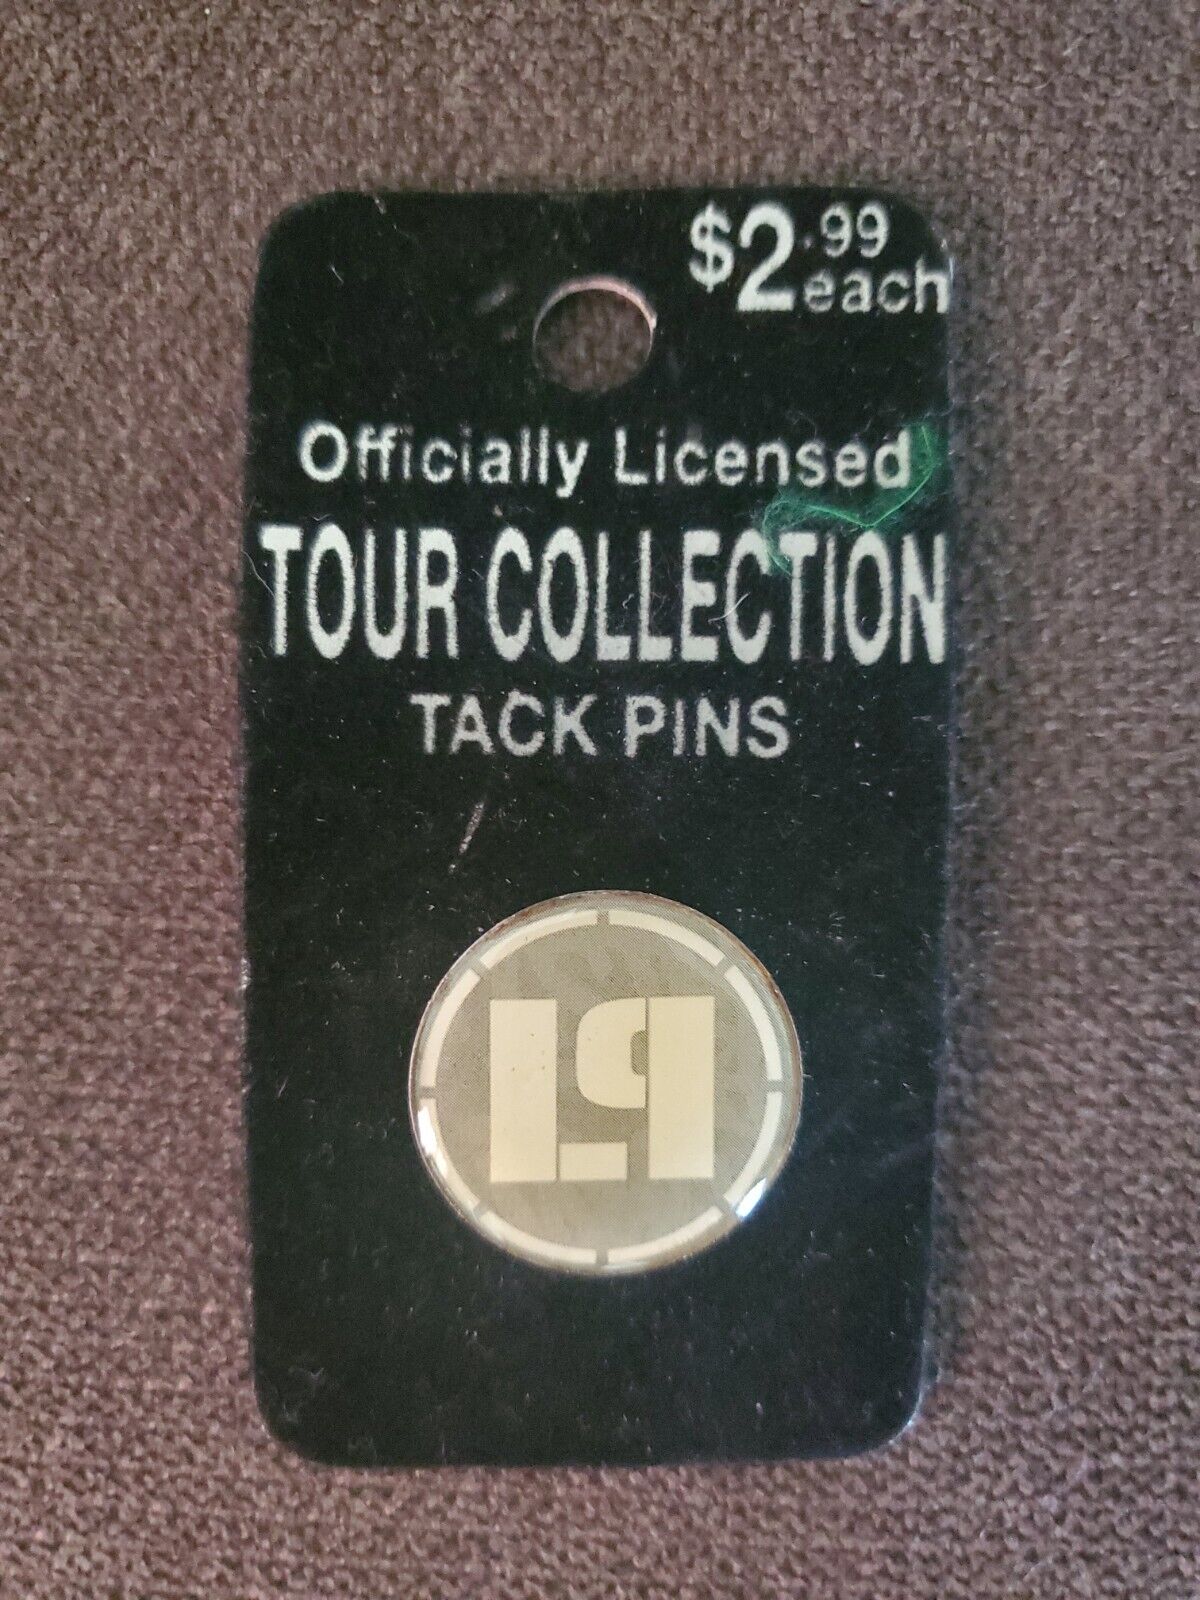 Linkin Park Officially Licensed Tour Collection Tack Pin 1”